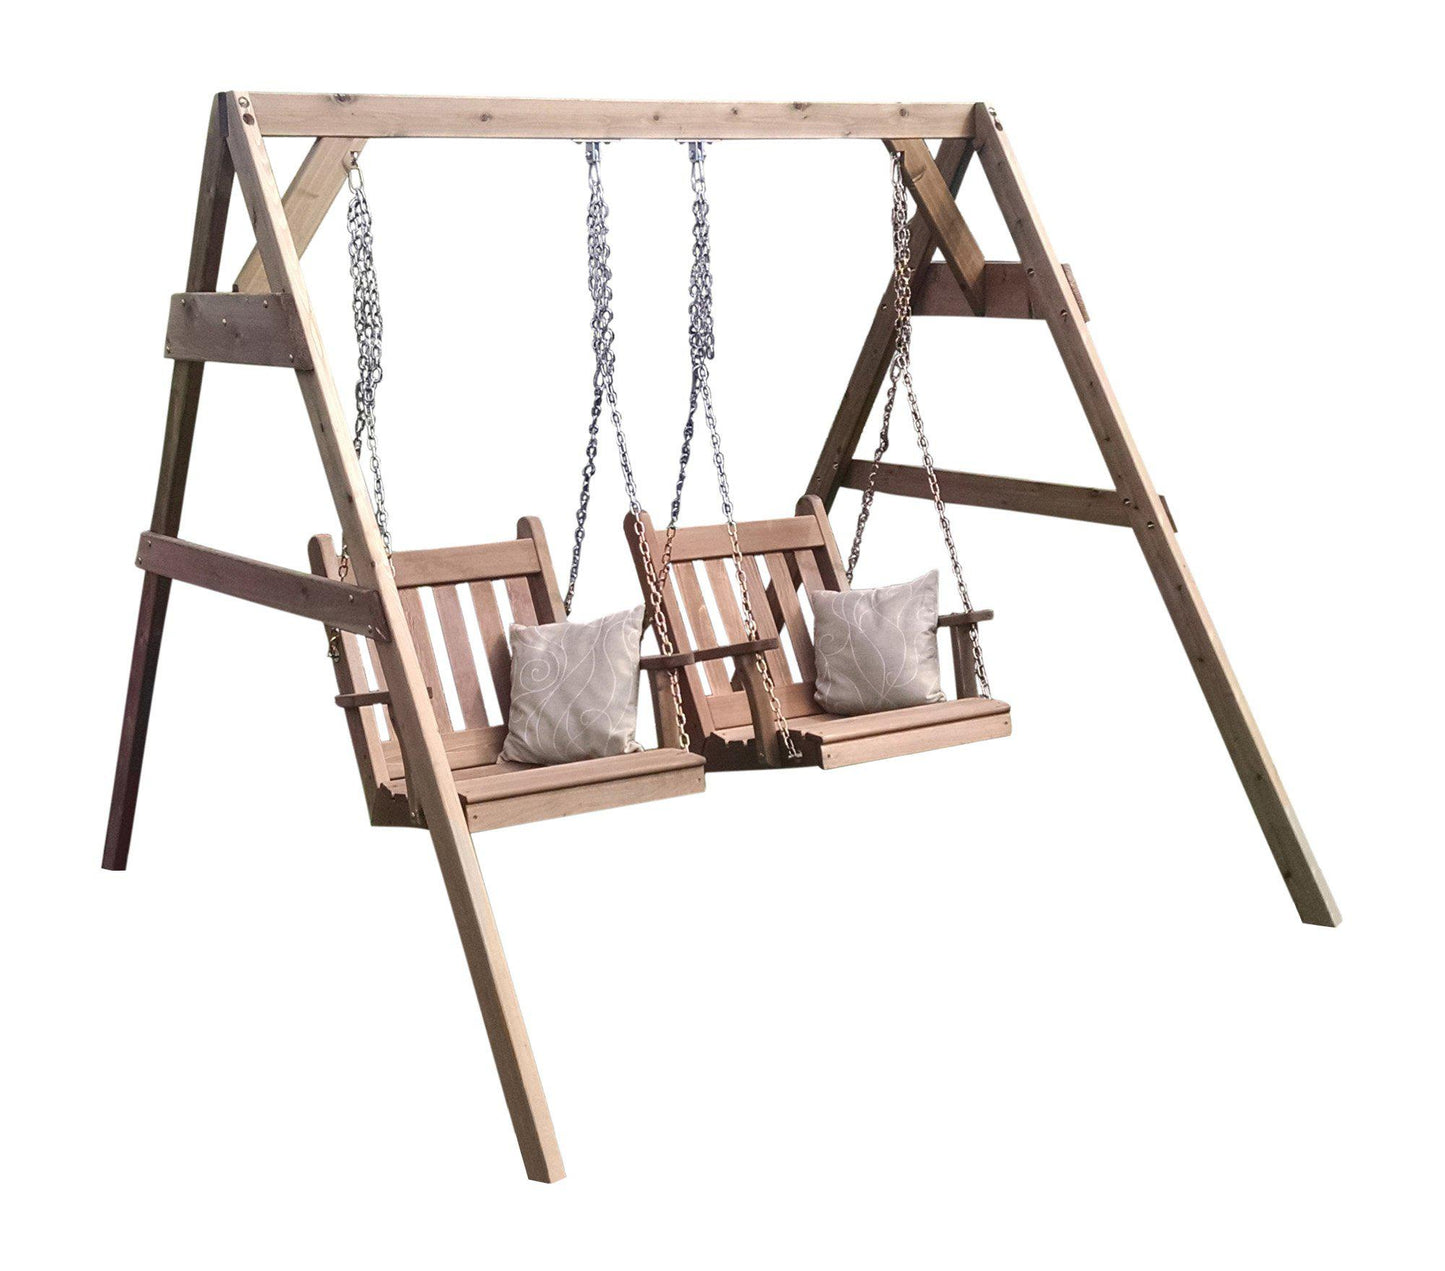 Regallion Outdoor 5ft. 2x4 A-Frame  Red Cedar Swing Stand for 2 Chair Swings 600 lbs Max Weight Capacity (Hangers Included) - LEAD TIME TO SHIP 2 WEEKS